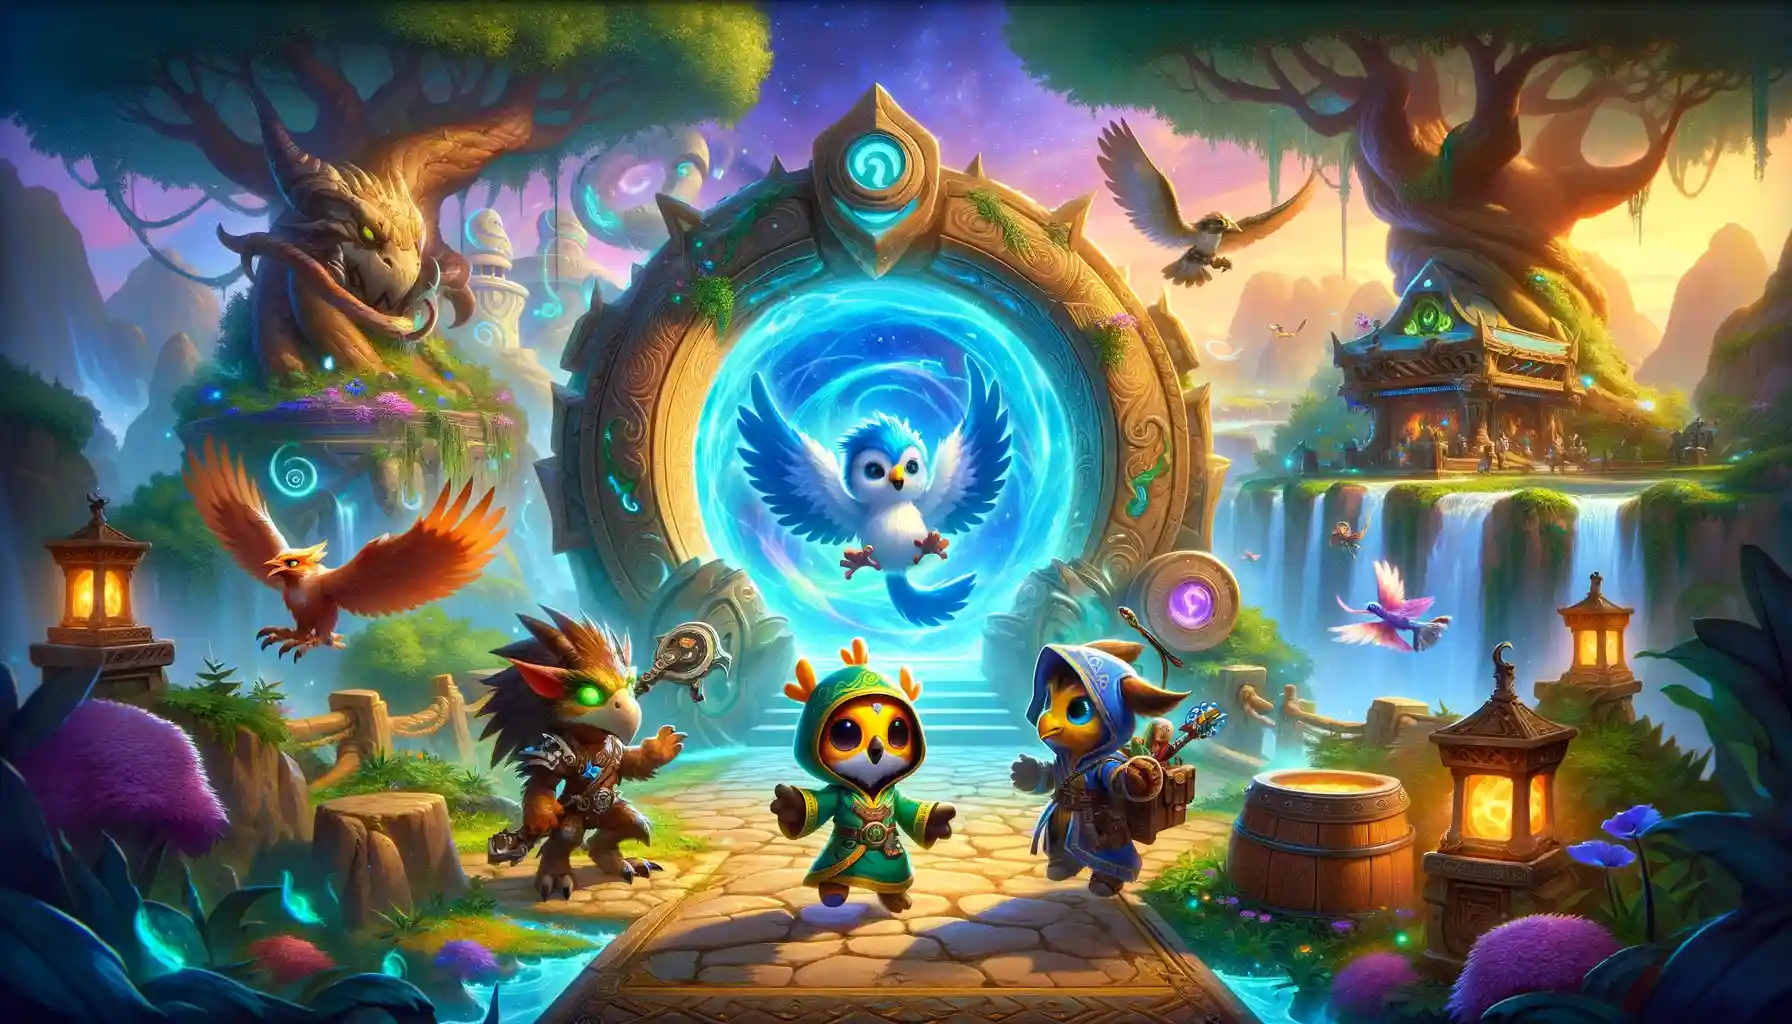 New Magical Shortcuts And Adorable Bird Costumes? Wow 10.2.5 Patch Is A Fantasy Lover'S Dream!